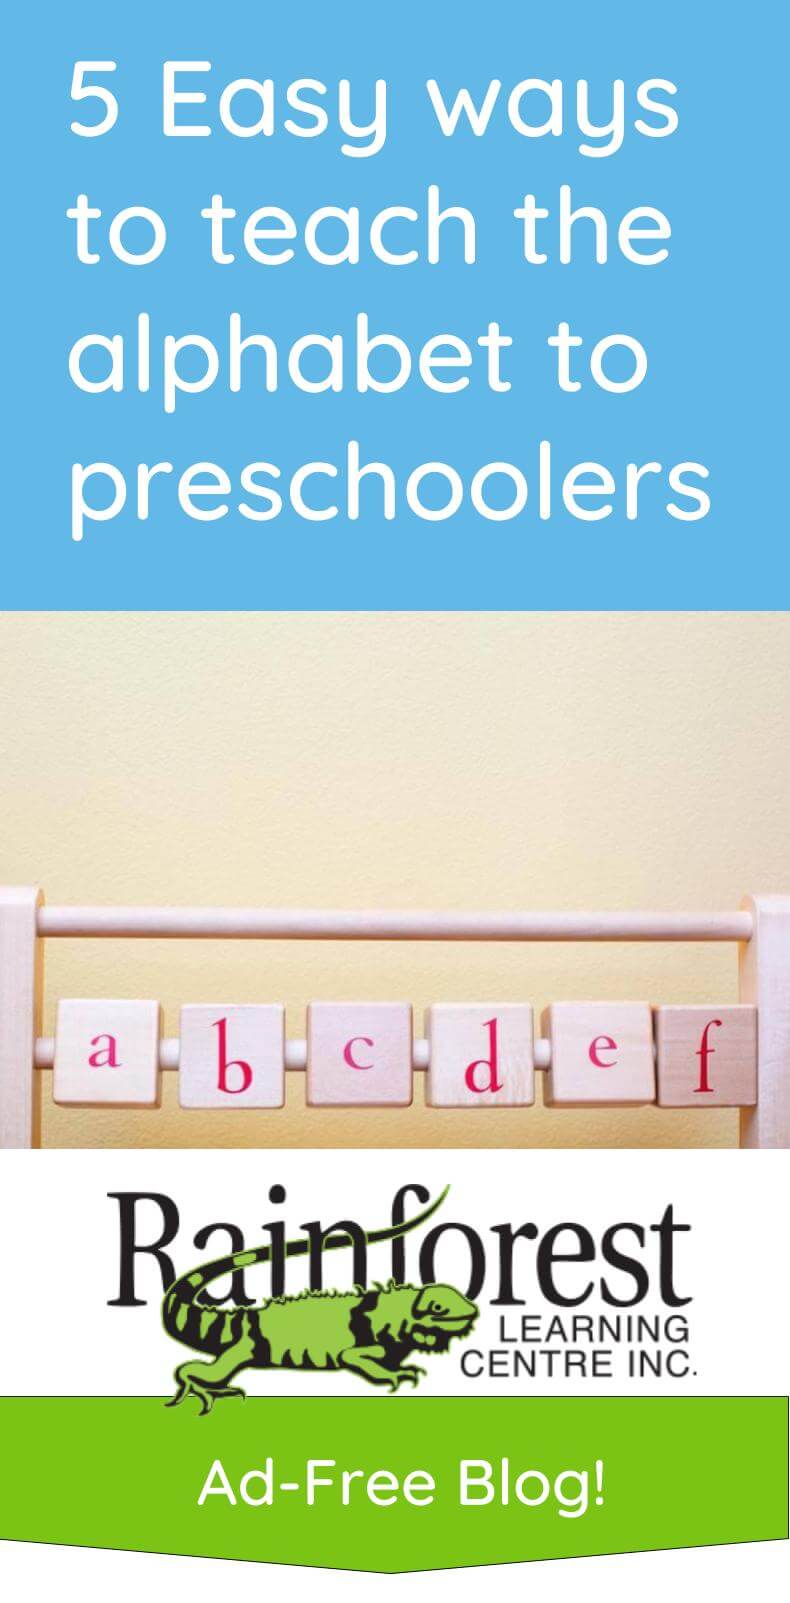 5 Easy ways to teach the alphabet to preschoolers article - pinterest image